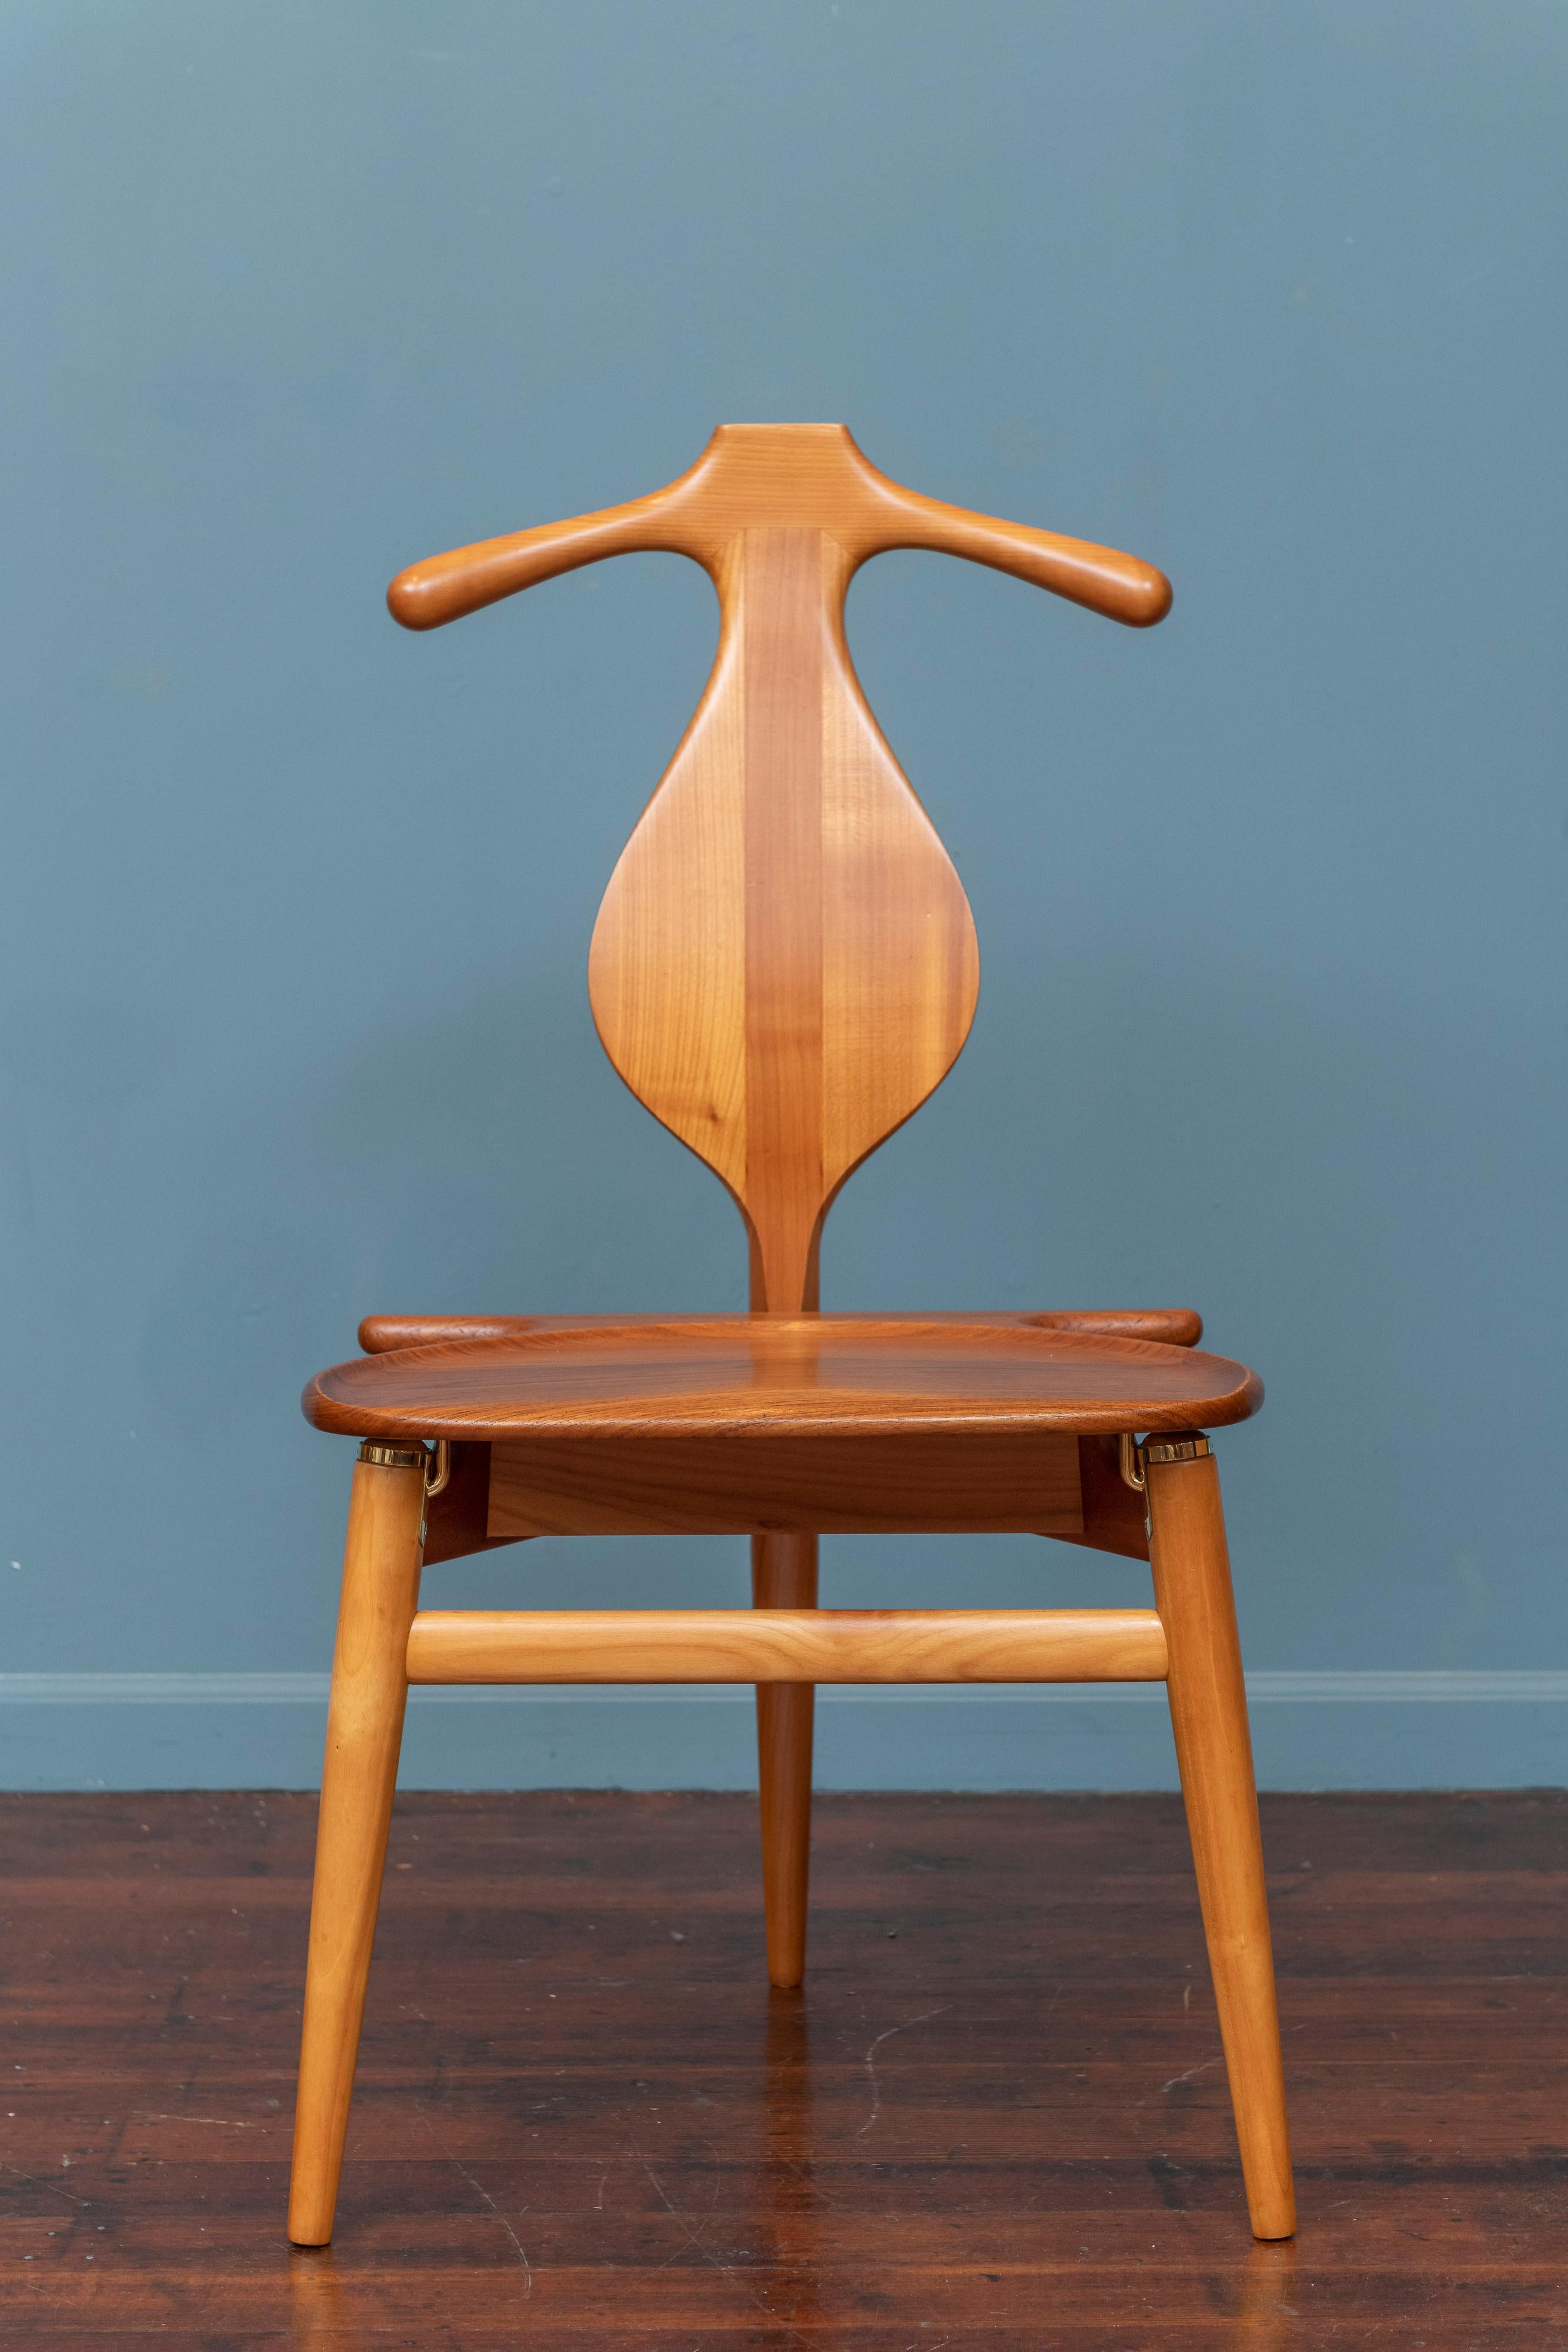 Hans Wegner valet chair for Johannes Hansen, Model JH-514. The ultimate valet chair designed to hold your coat, pants and tie to keep them from wrinkling with storage for belts and accessories inside. Made from high quality materials and carpentry